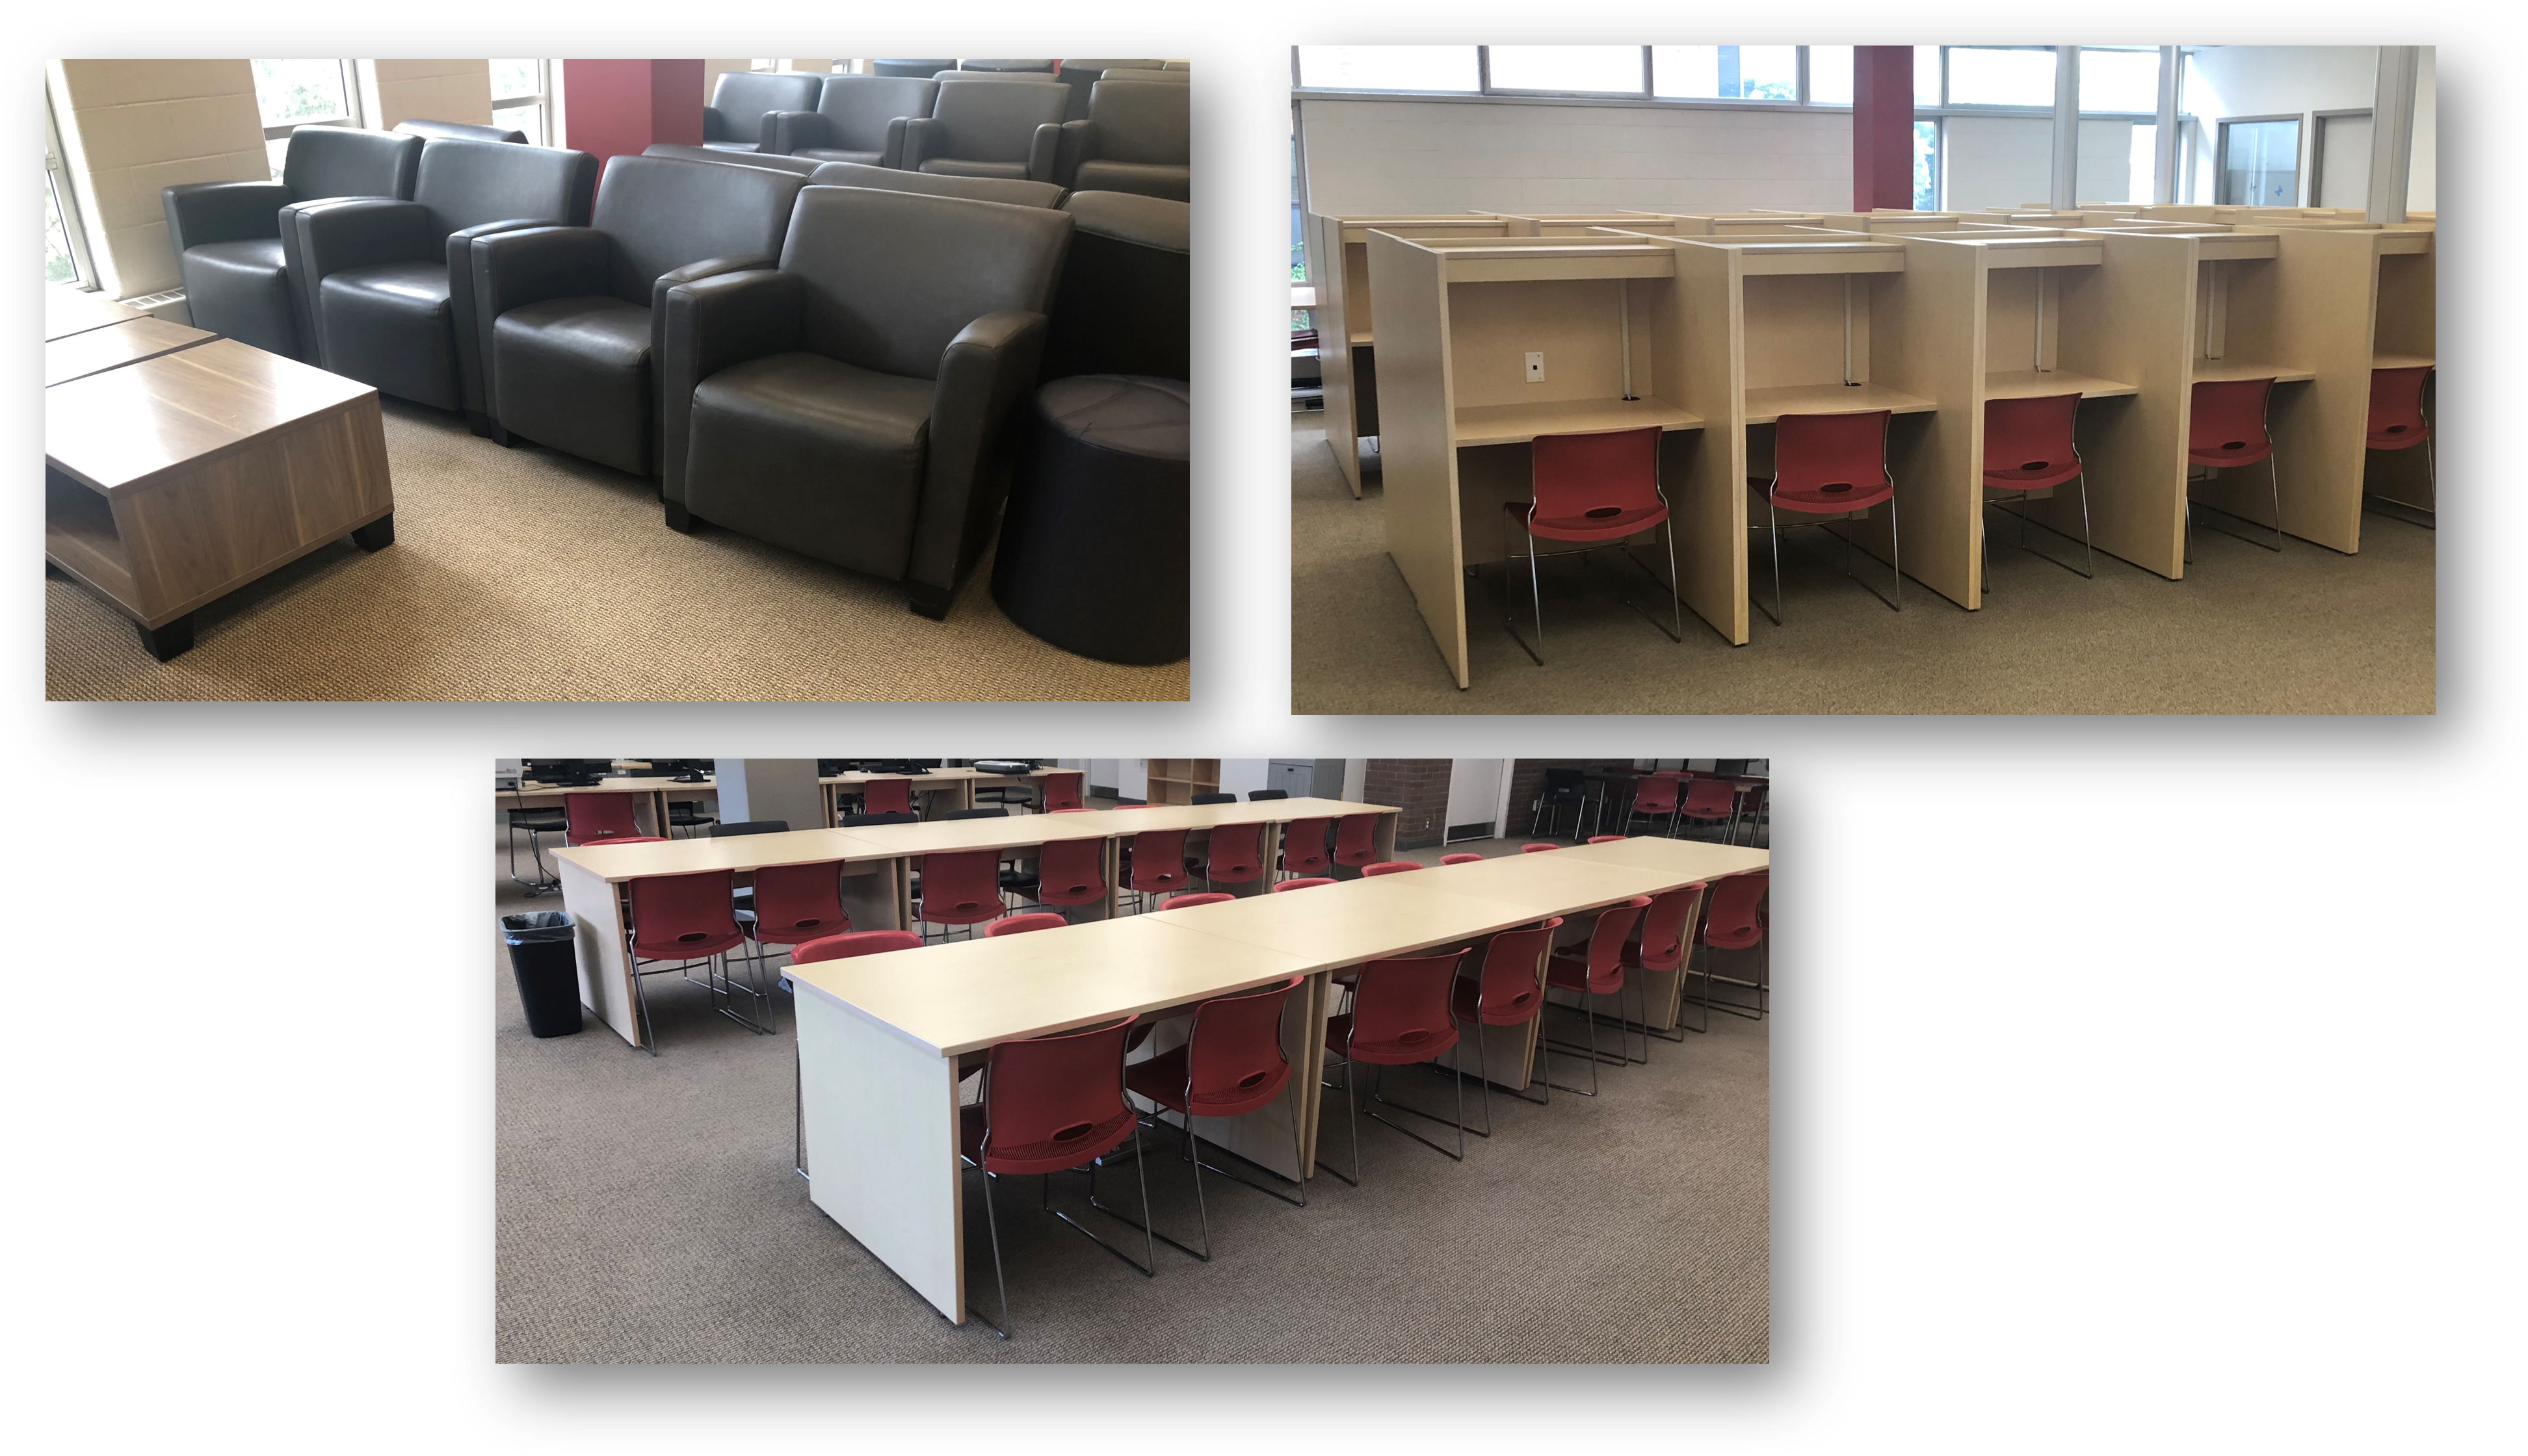 Three images of sitting areas. A row of comfy chairs, a large table with chairs along it, and study carrells for more private study. Ask for description.